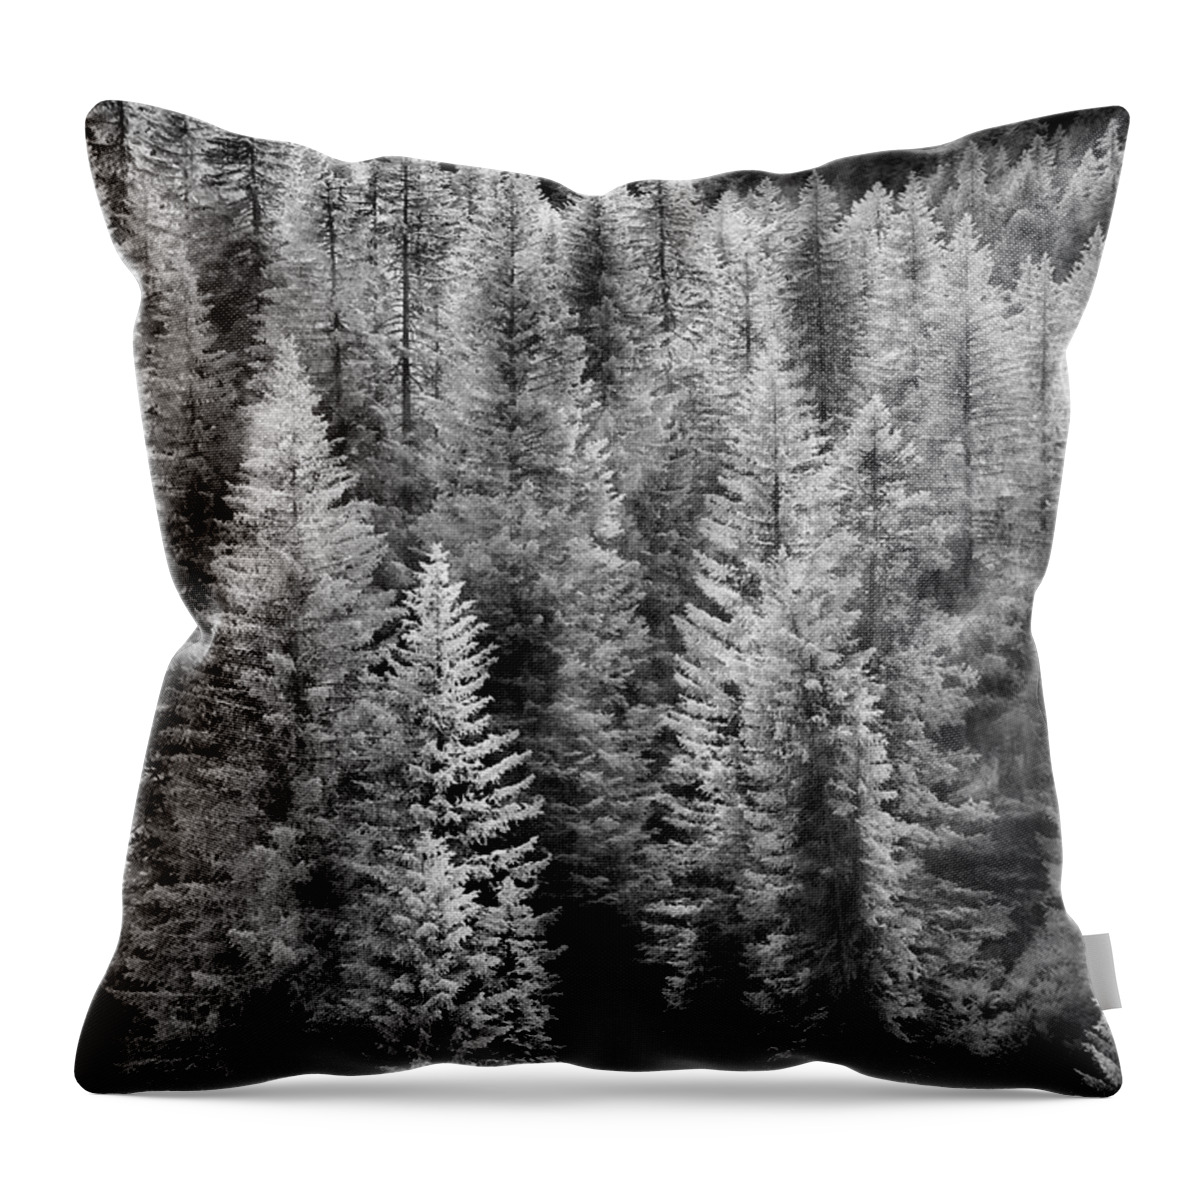 Black And White Throw Pillow featuring the photograph One Of Many Alp Trees by Jon Glaser